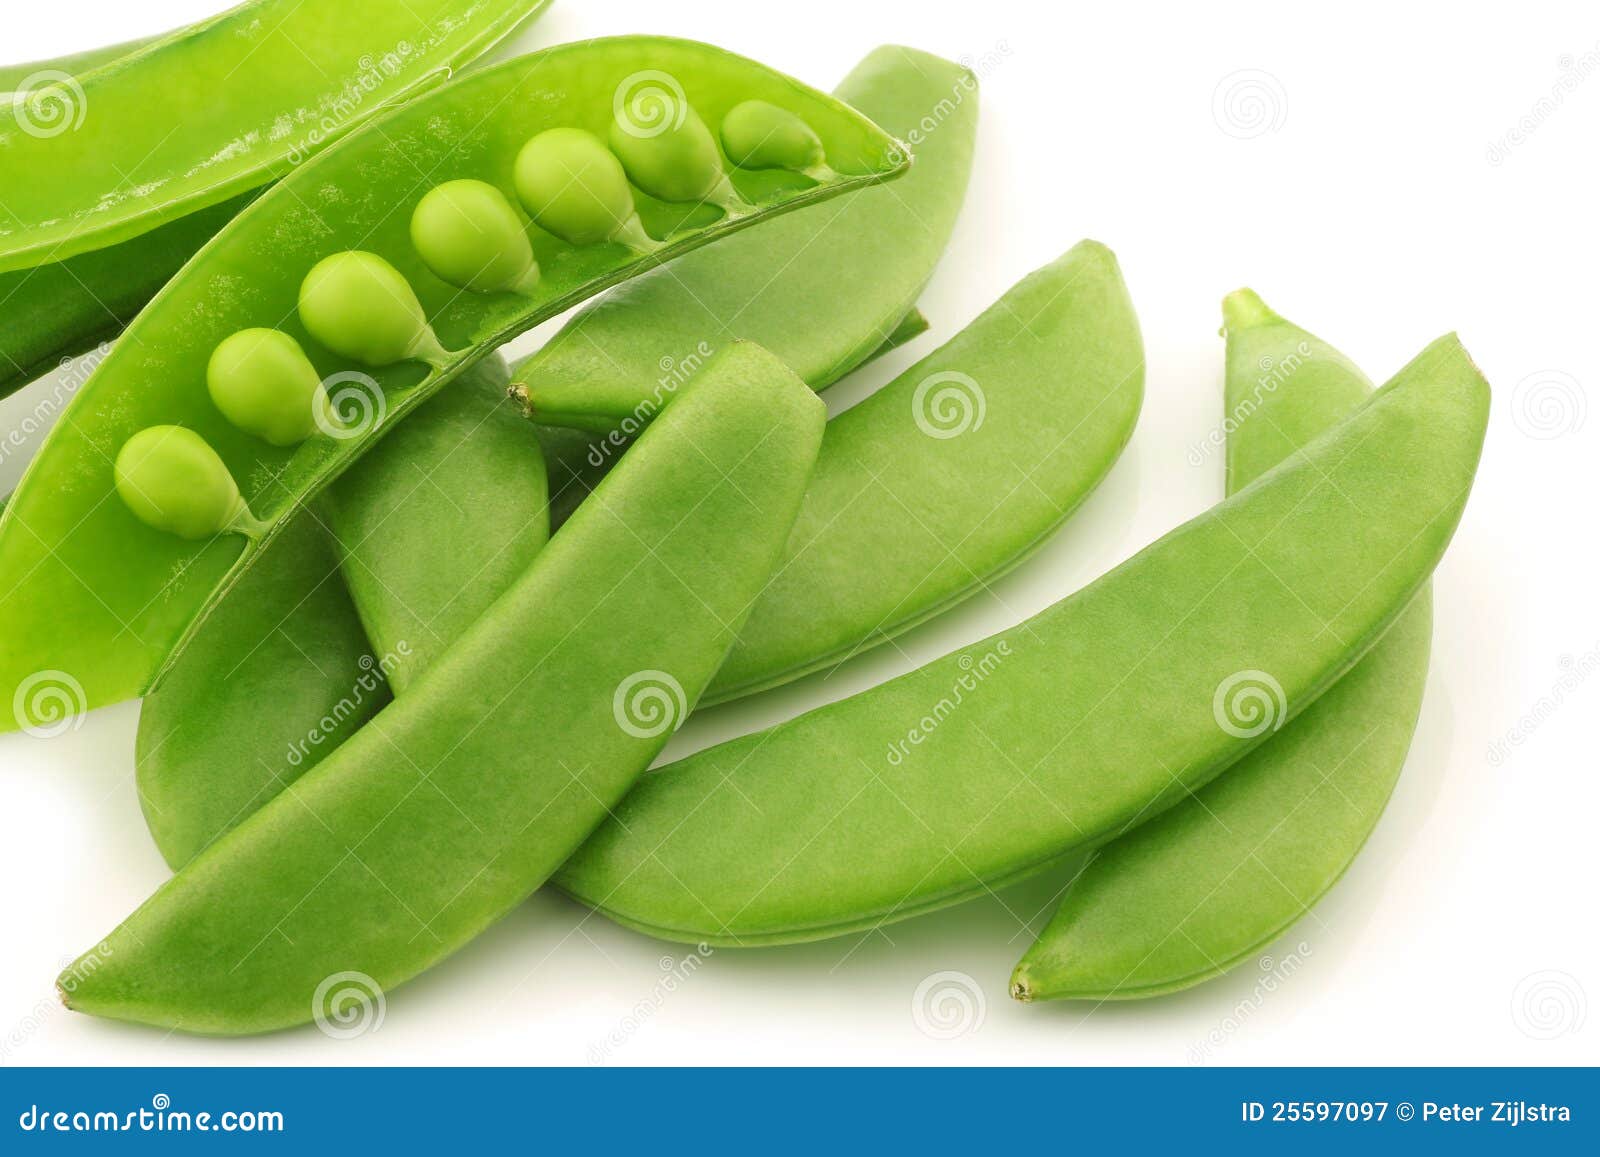 bunch of sugar snaps with one opened pod